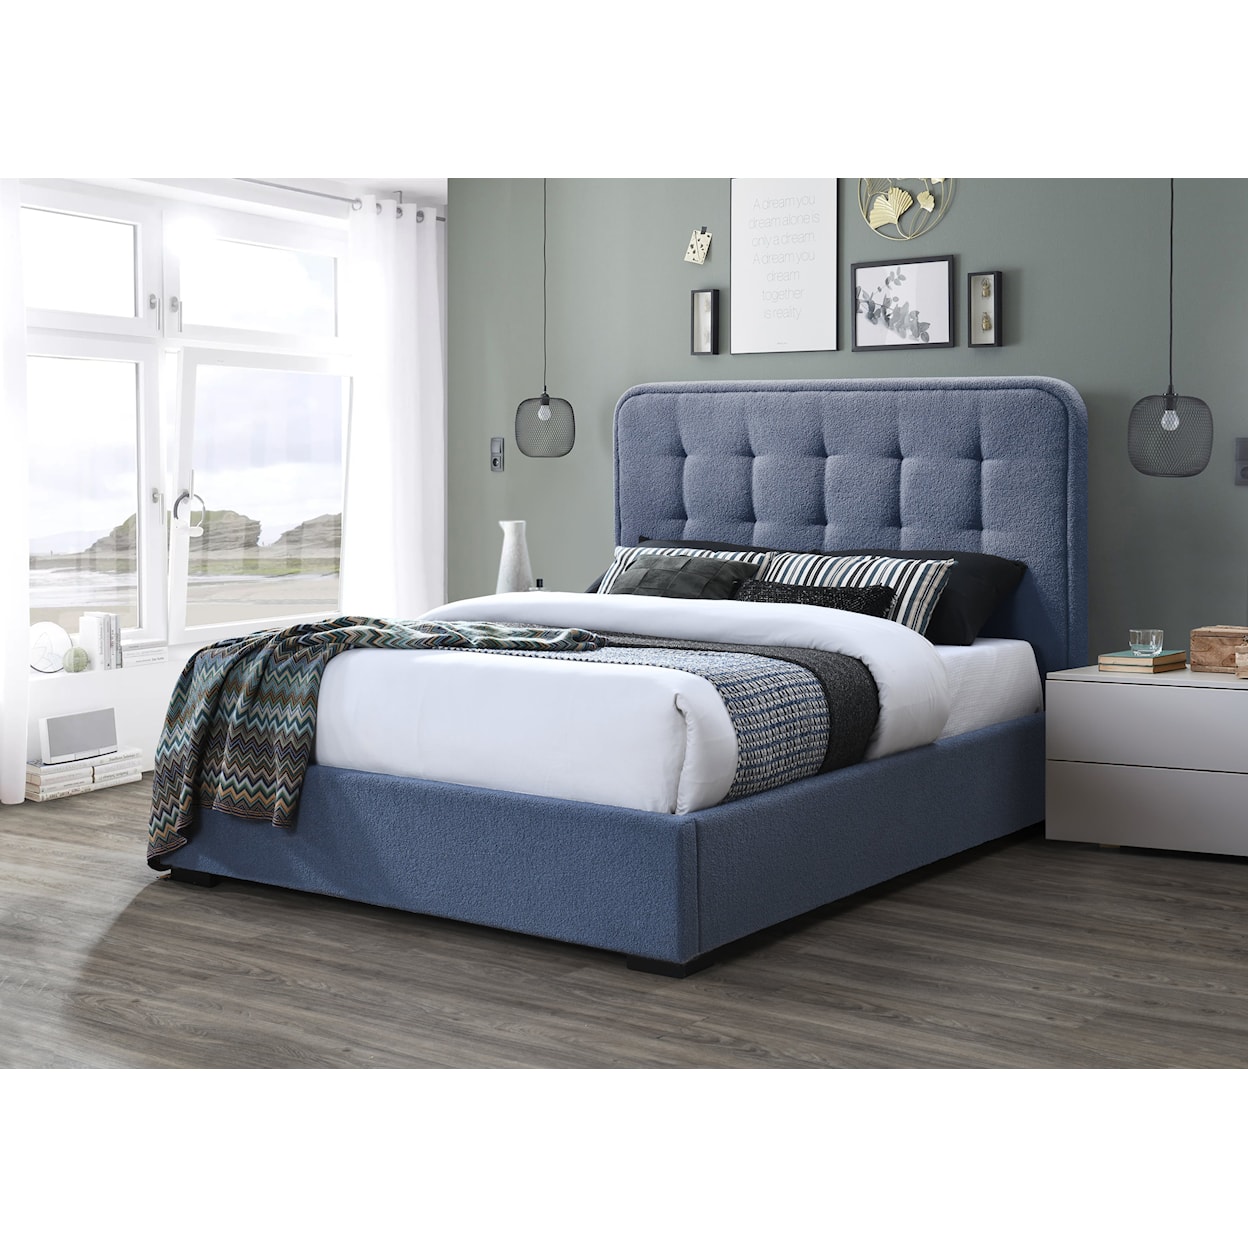 Lifestyle 9434A Upholstered Bed - Queen